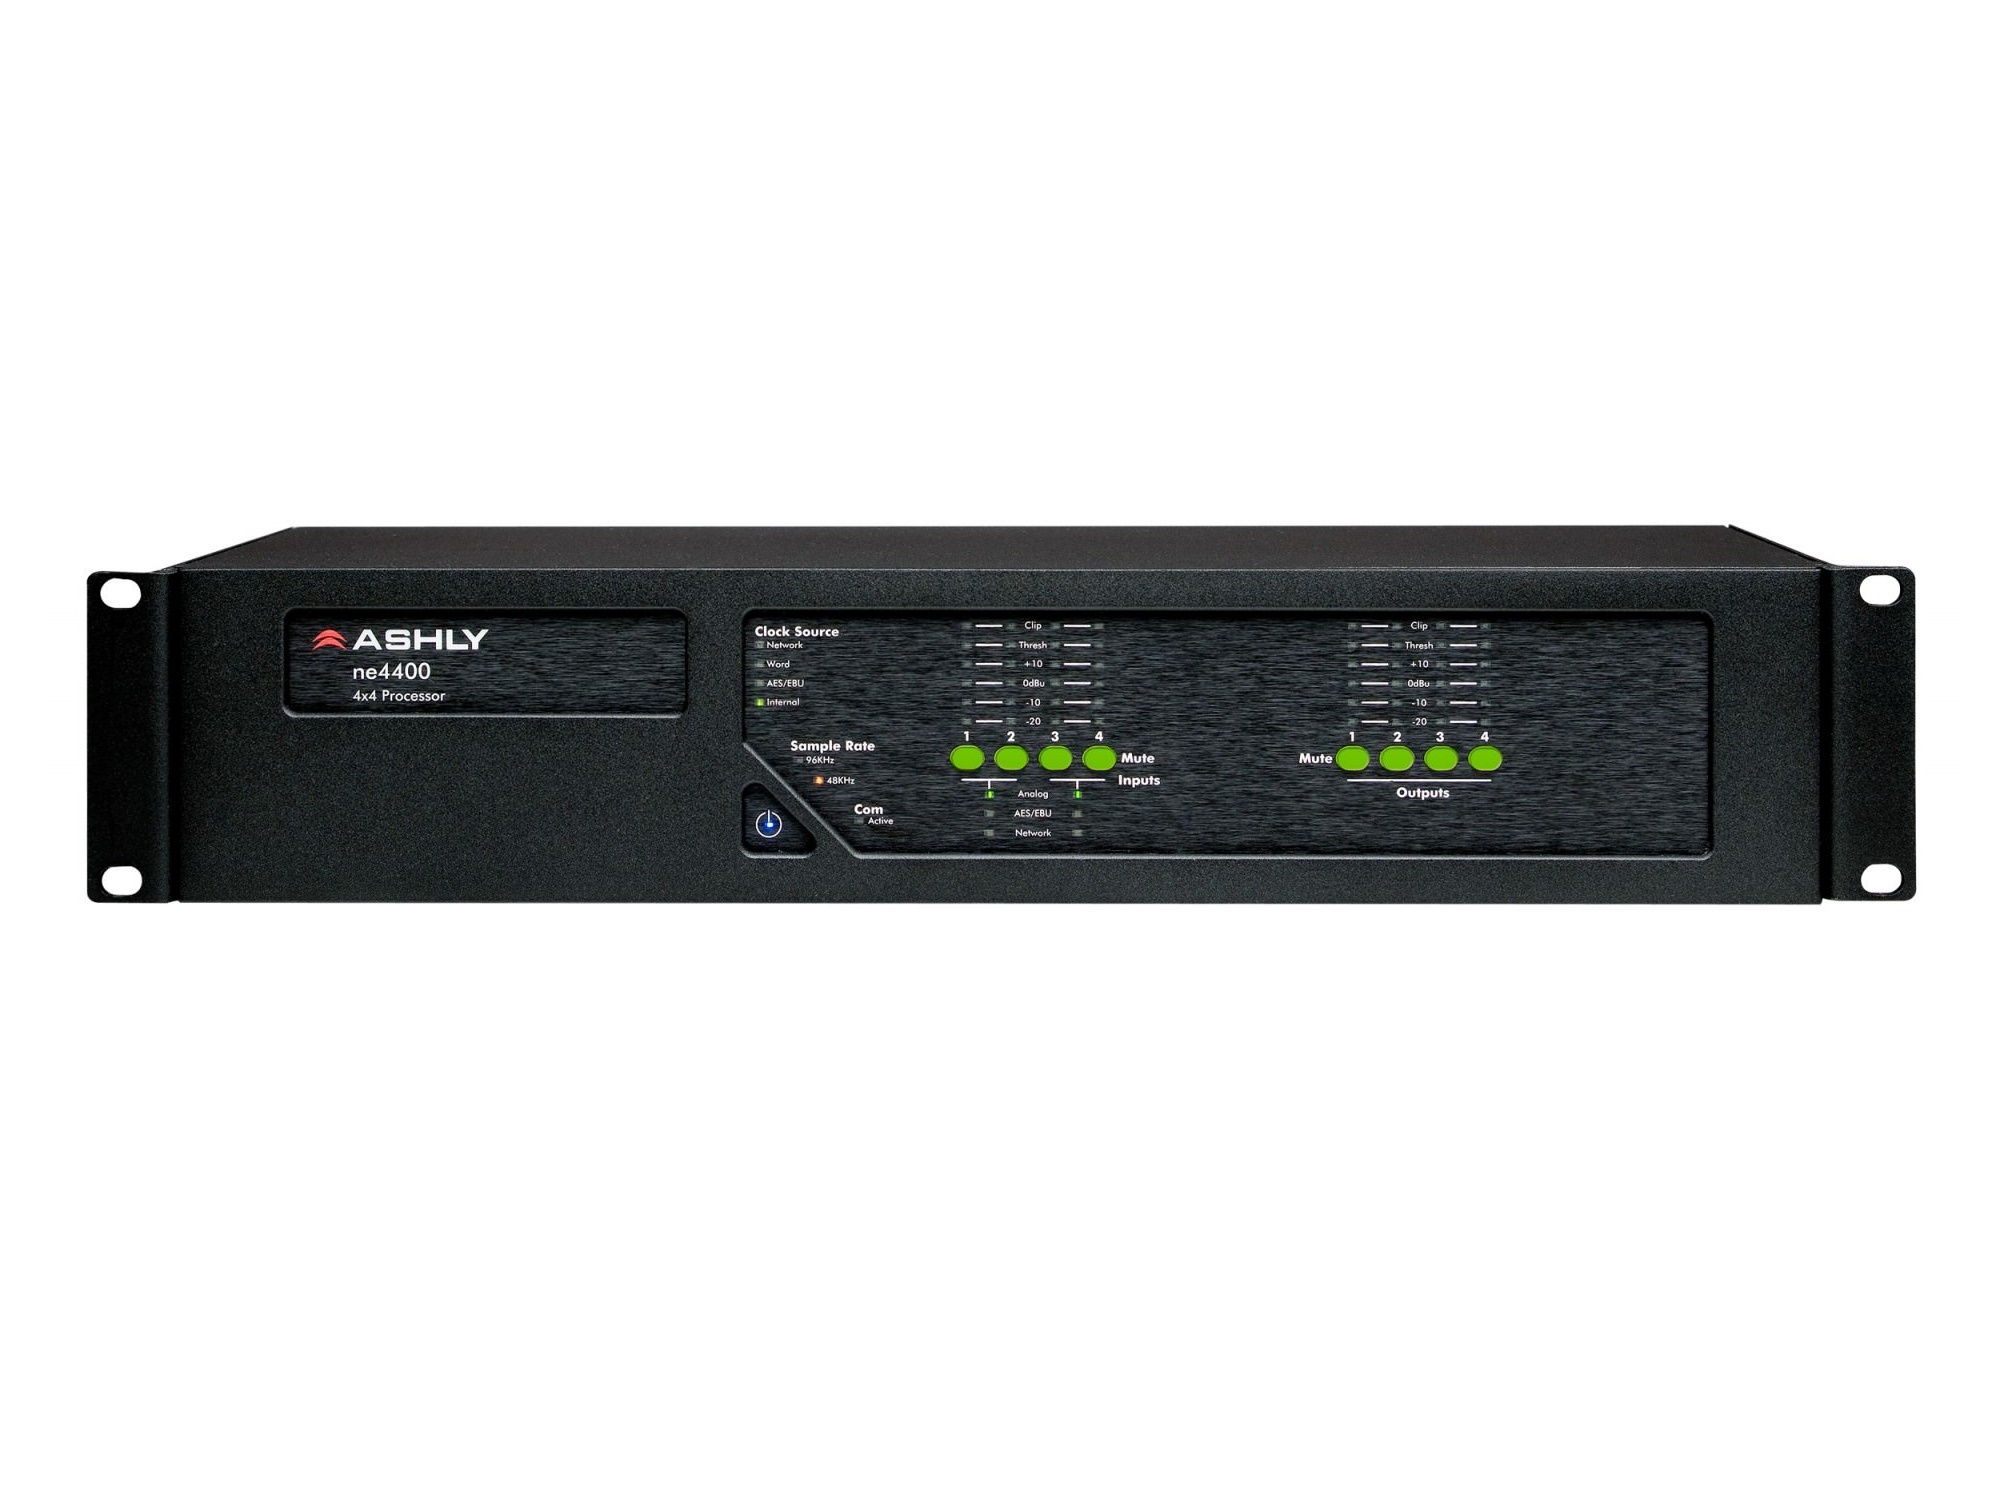 ne4400asd ne4400 Network Processor plus 4-Chan AES3 Inputs and 4-Chan AES3 Outputs/Dante Network Card by Ashly